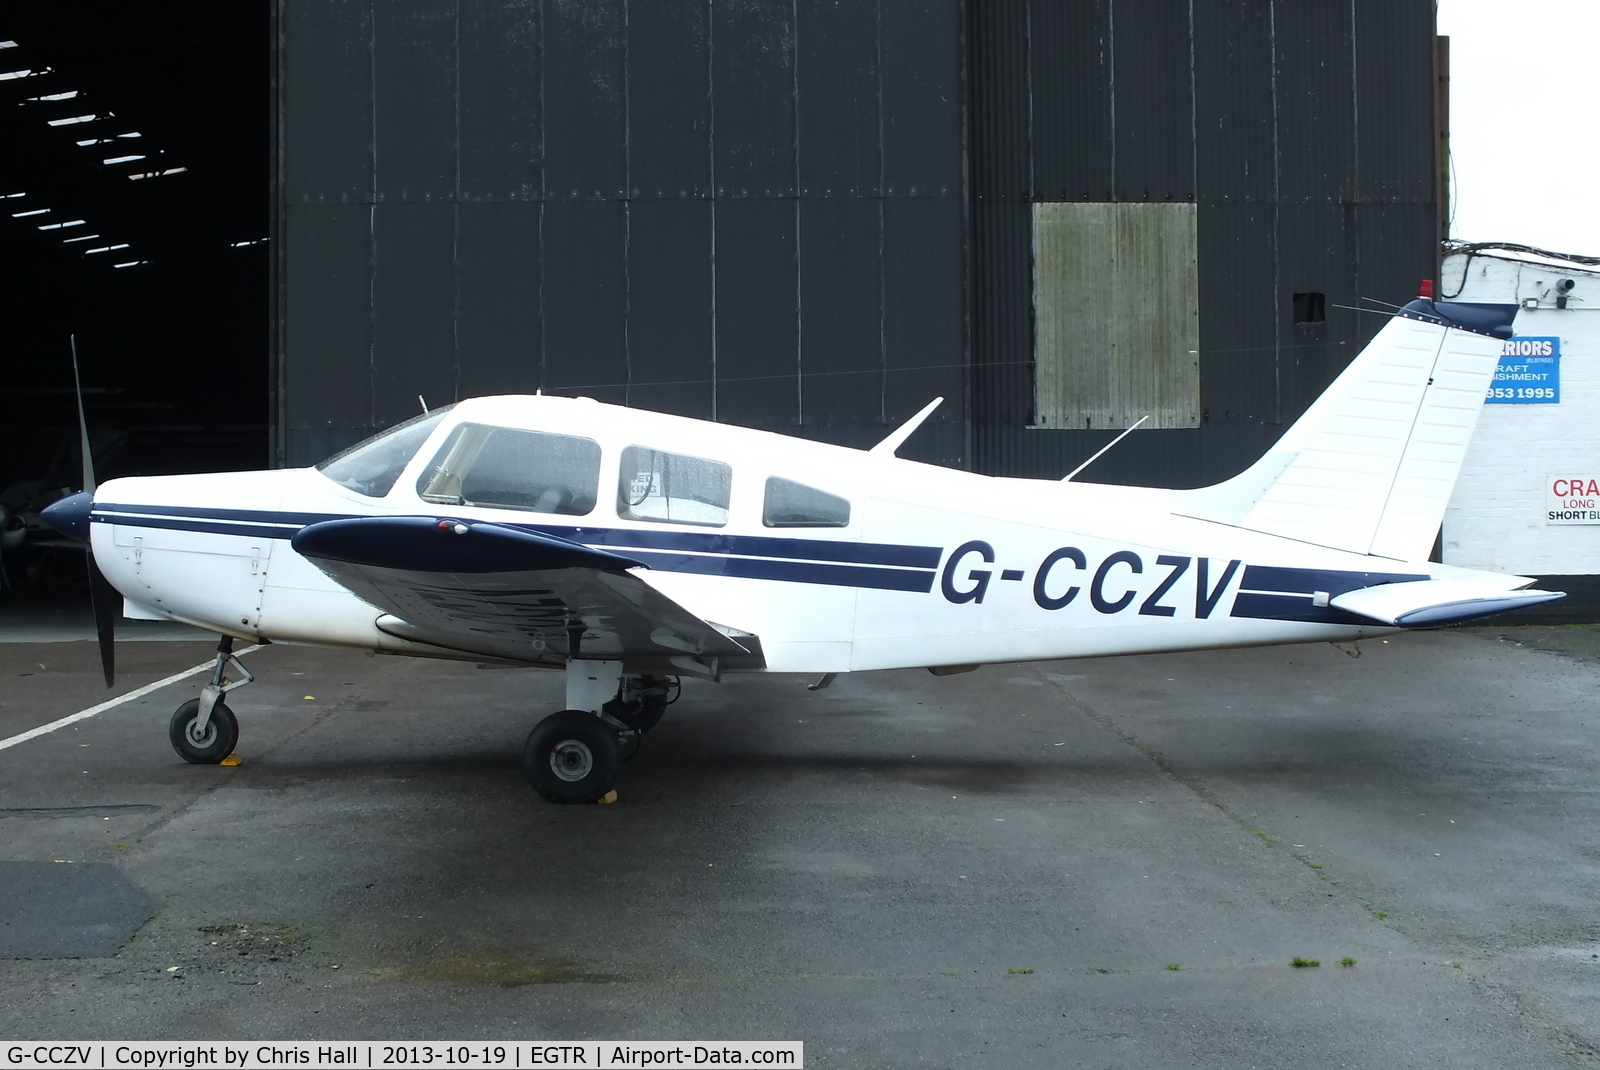 G-CCZV, 1977 Piper PA-28-151 Cherokee Warrior C/N 28-7715089, parked at Elstree